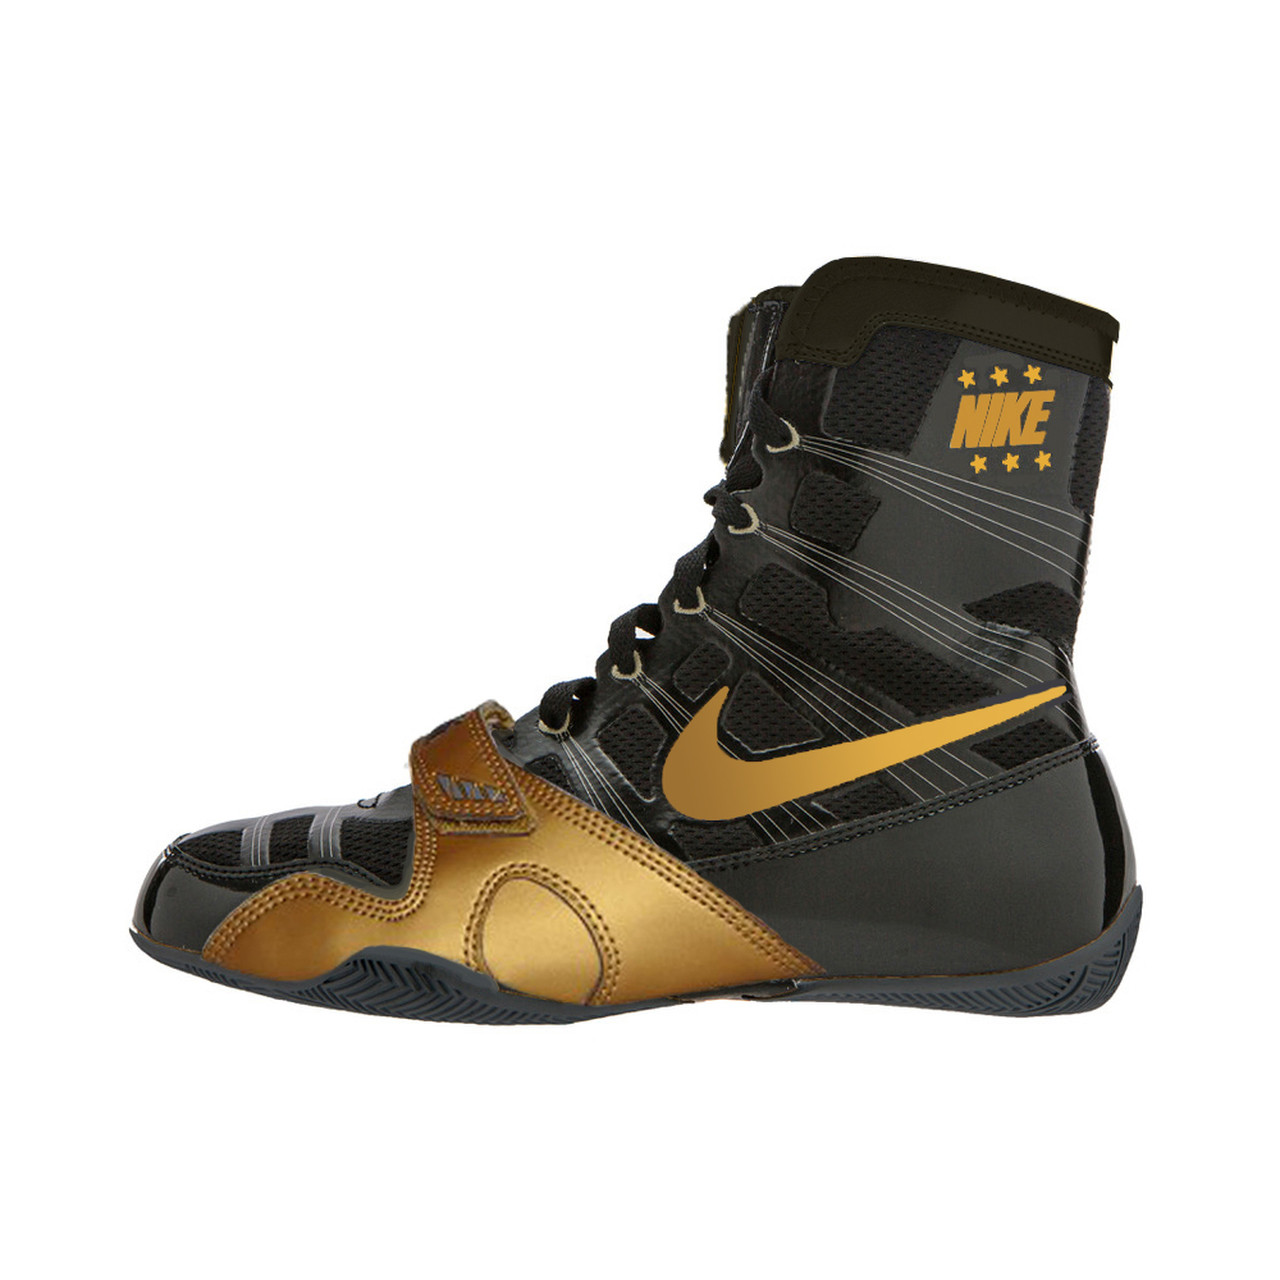 black and gold nike apparel